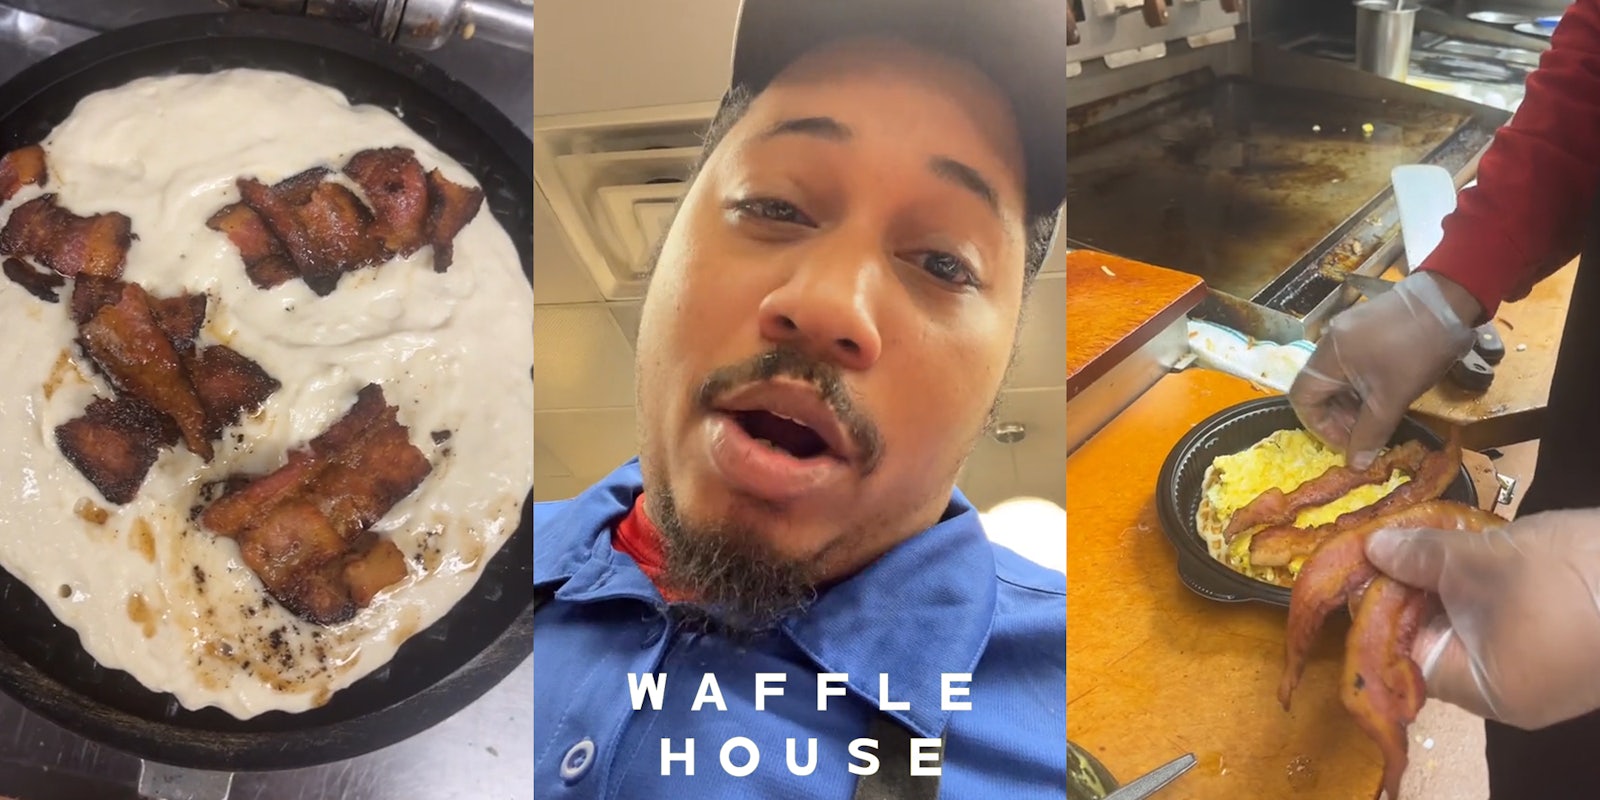 bacon inside of eggs on cooker (l) Waffle House employee speaking with Waffle House logo at bottom (c) Waffle House employee adding bacon to eggs on waffle in black container (r)